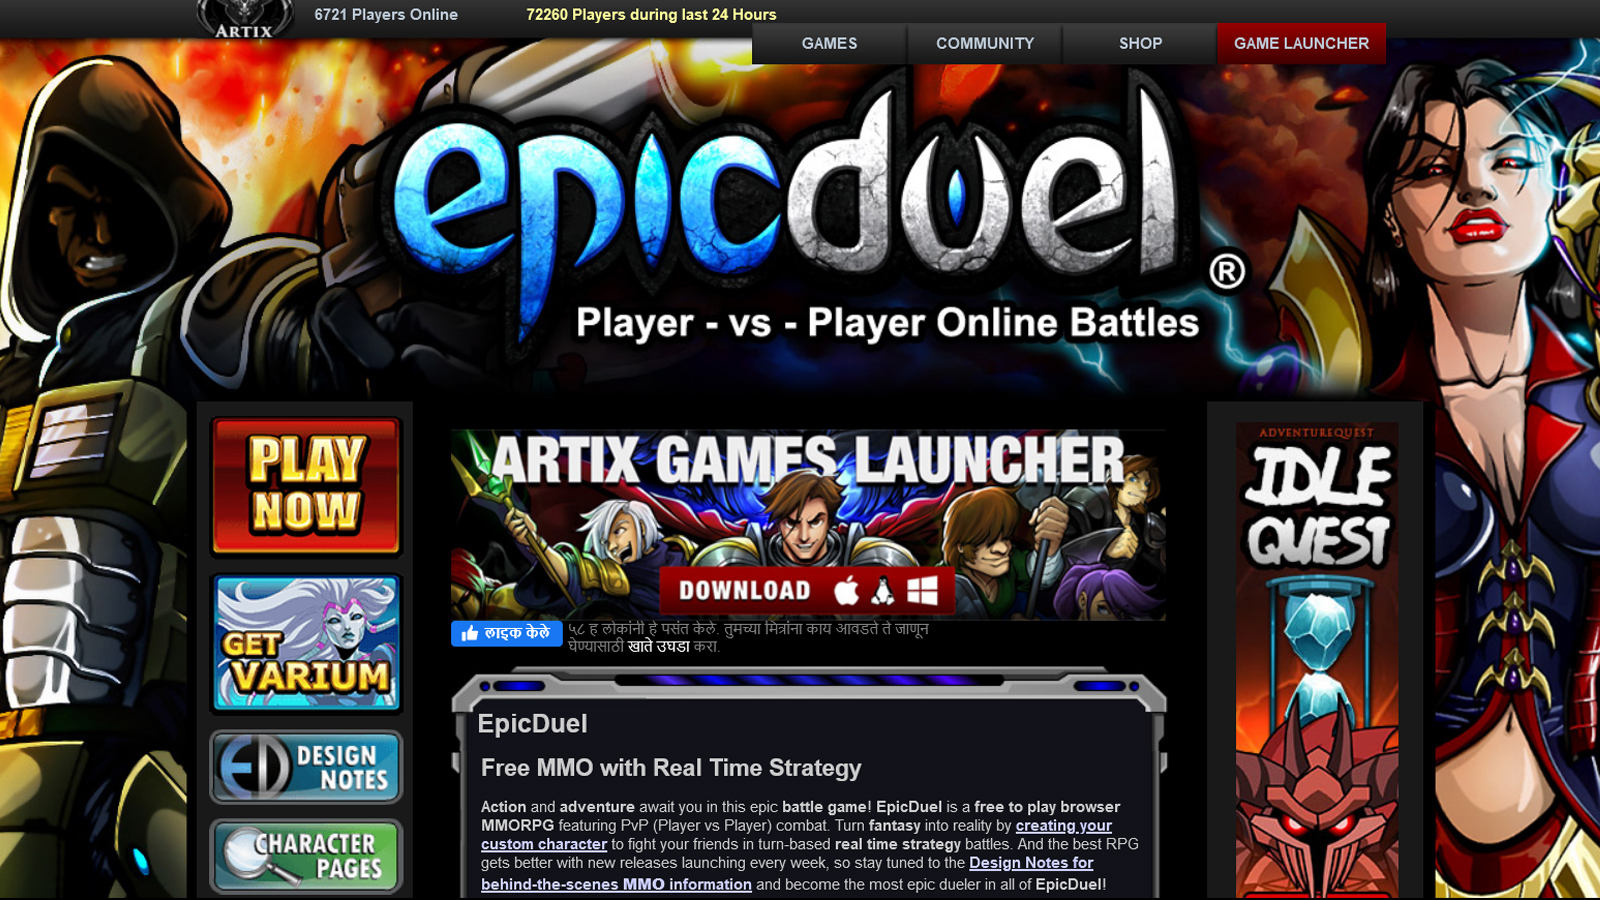 Find pricing, reviews and other details about Epic Duel